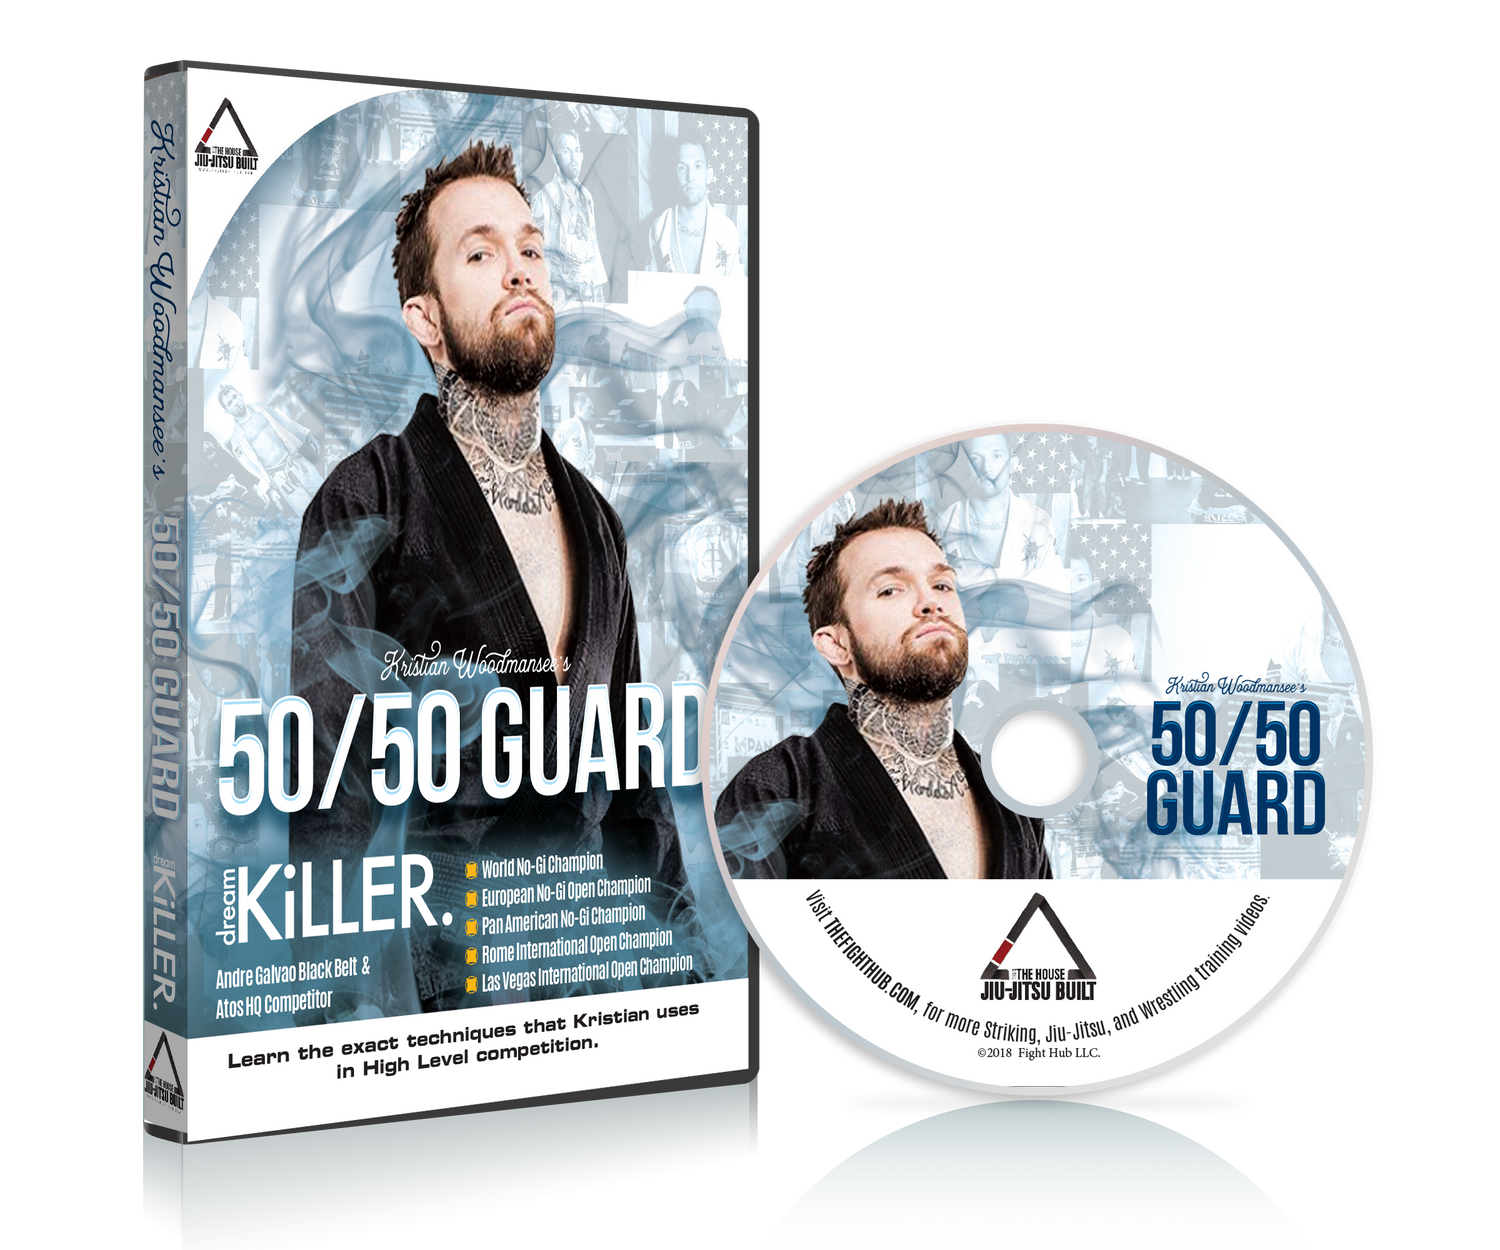 50/50 Guard DVD by Kristian Woodmansee - Budovideos Inc